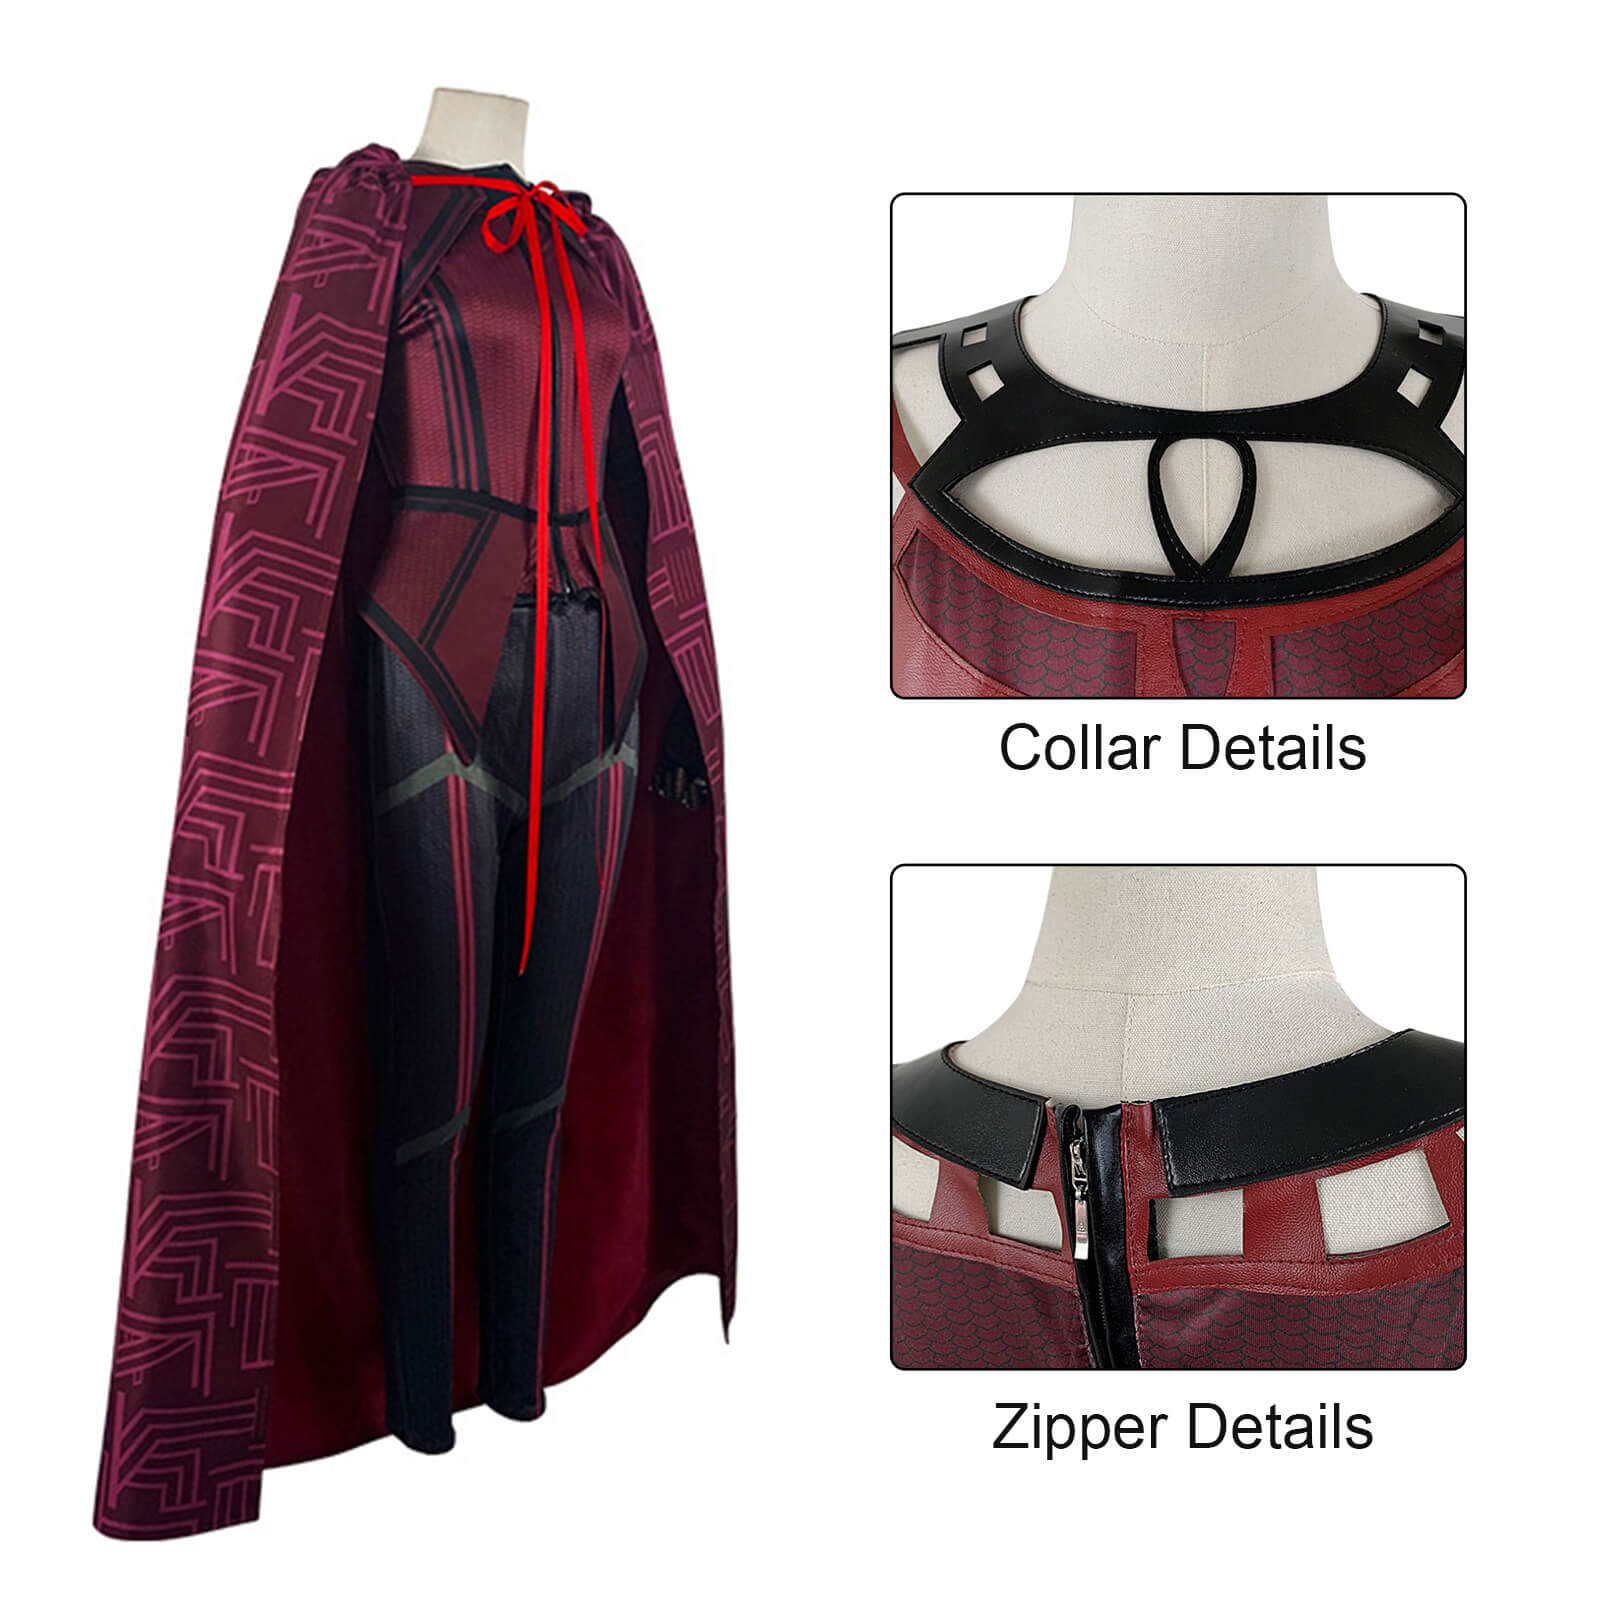 Maximoff Cosplay Costume Red Witch Halloween Carnival Outfit with Cloak and Headwear